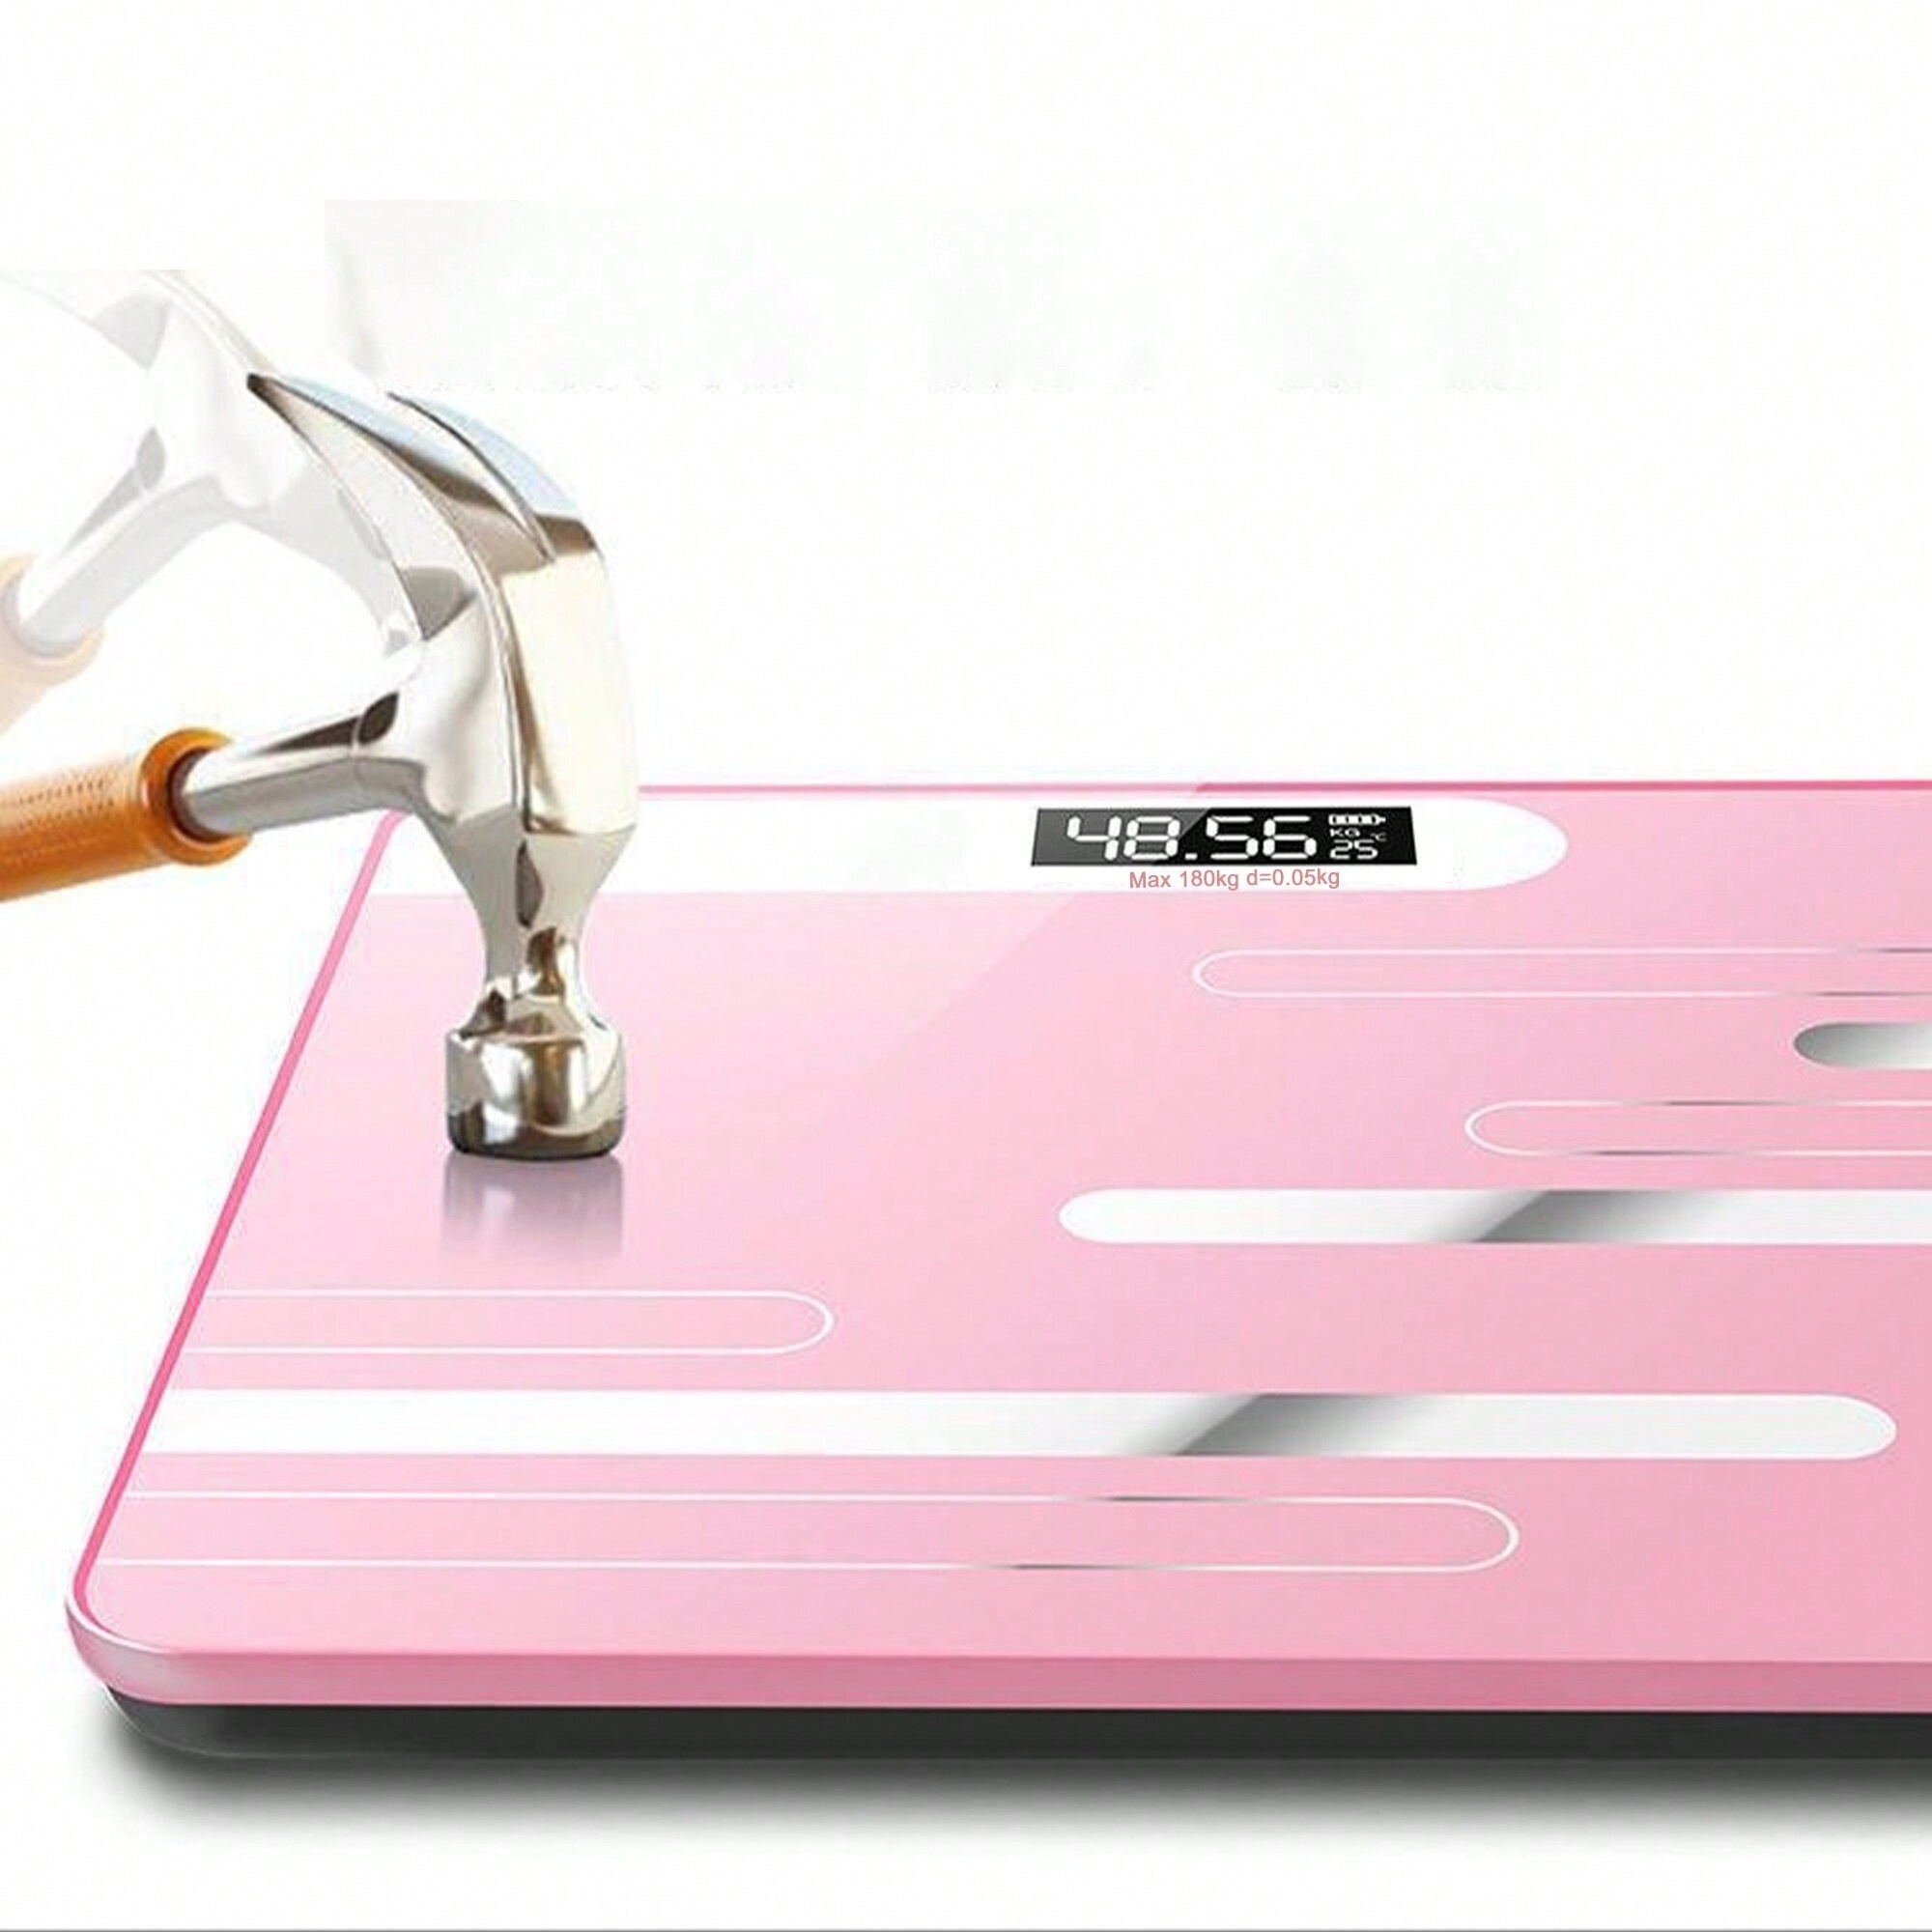 Body Weight Scales Transparent Round Digital Scale Body Weight Scale Floor  Electronic Scales Smart LCD Bathroom Scales Weighing Scale 231007 From  Bao04, $19.8